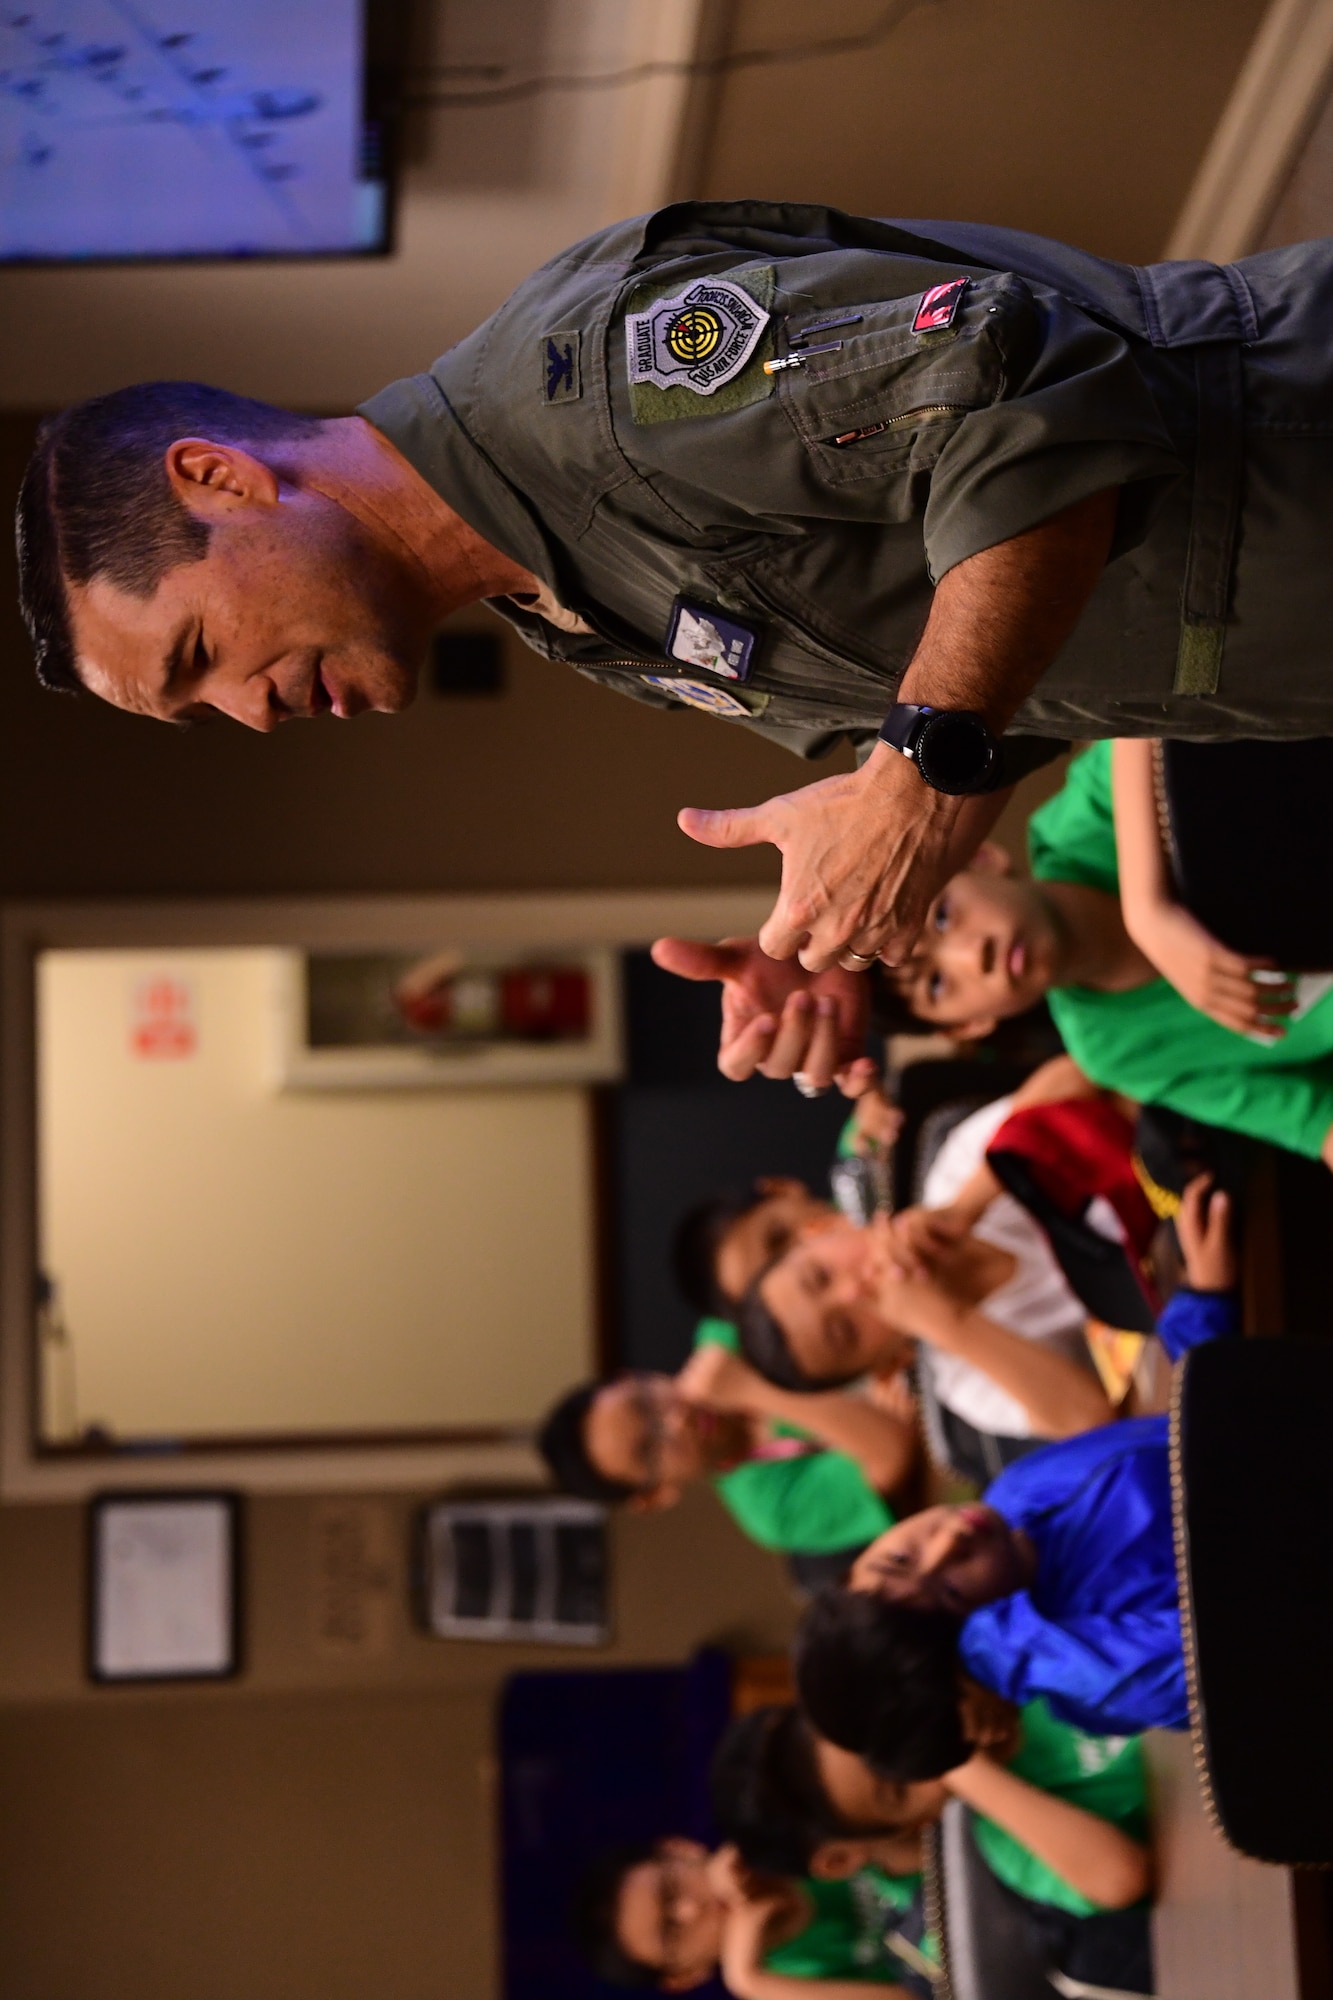 U.S. Air National Guard Col. Keith Ward commander 146th Airlift Wing, converses with a group of students attending a summer camp with St. Stephen’s Academy during a base tour at the Channel Islands Air National Guard Station, Port Hueneme, CA. July 25, 2019. (U.S. Air National Guard photo by Tech. Sgt. Nieko Carzis)